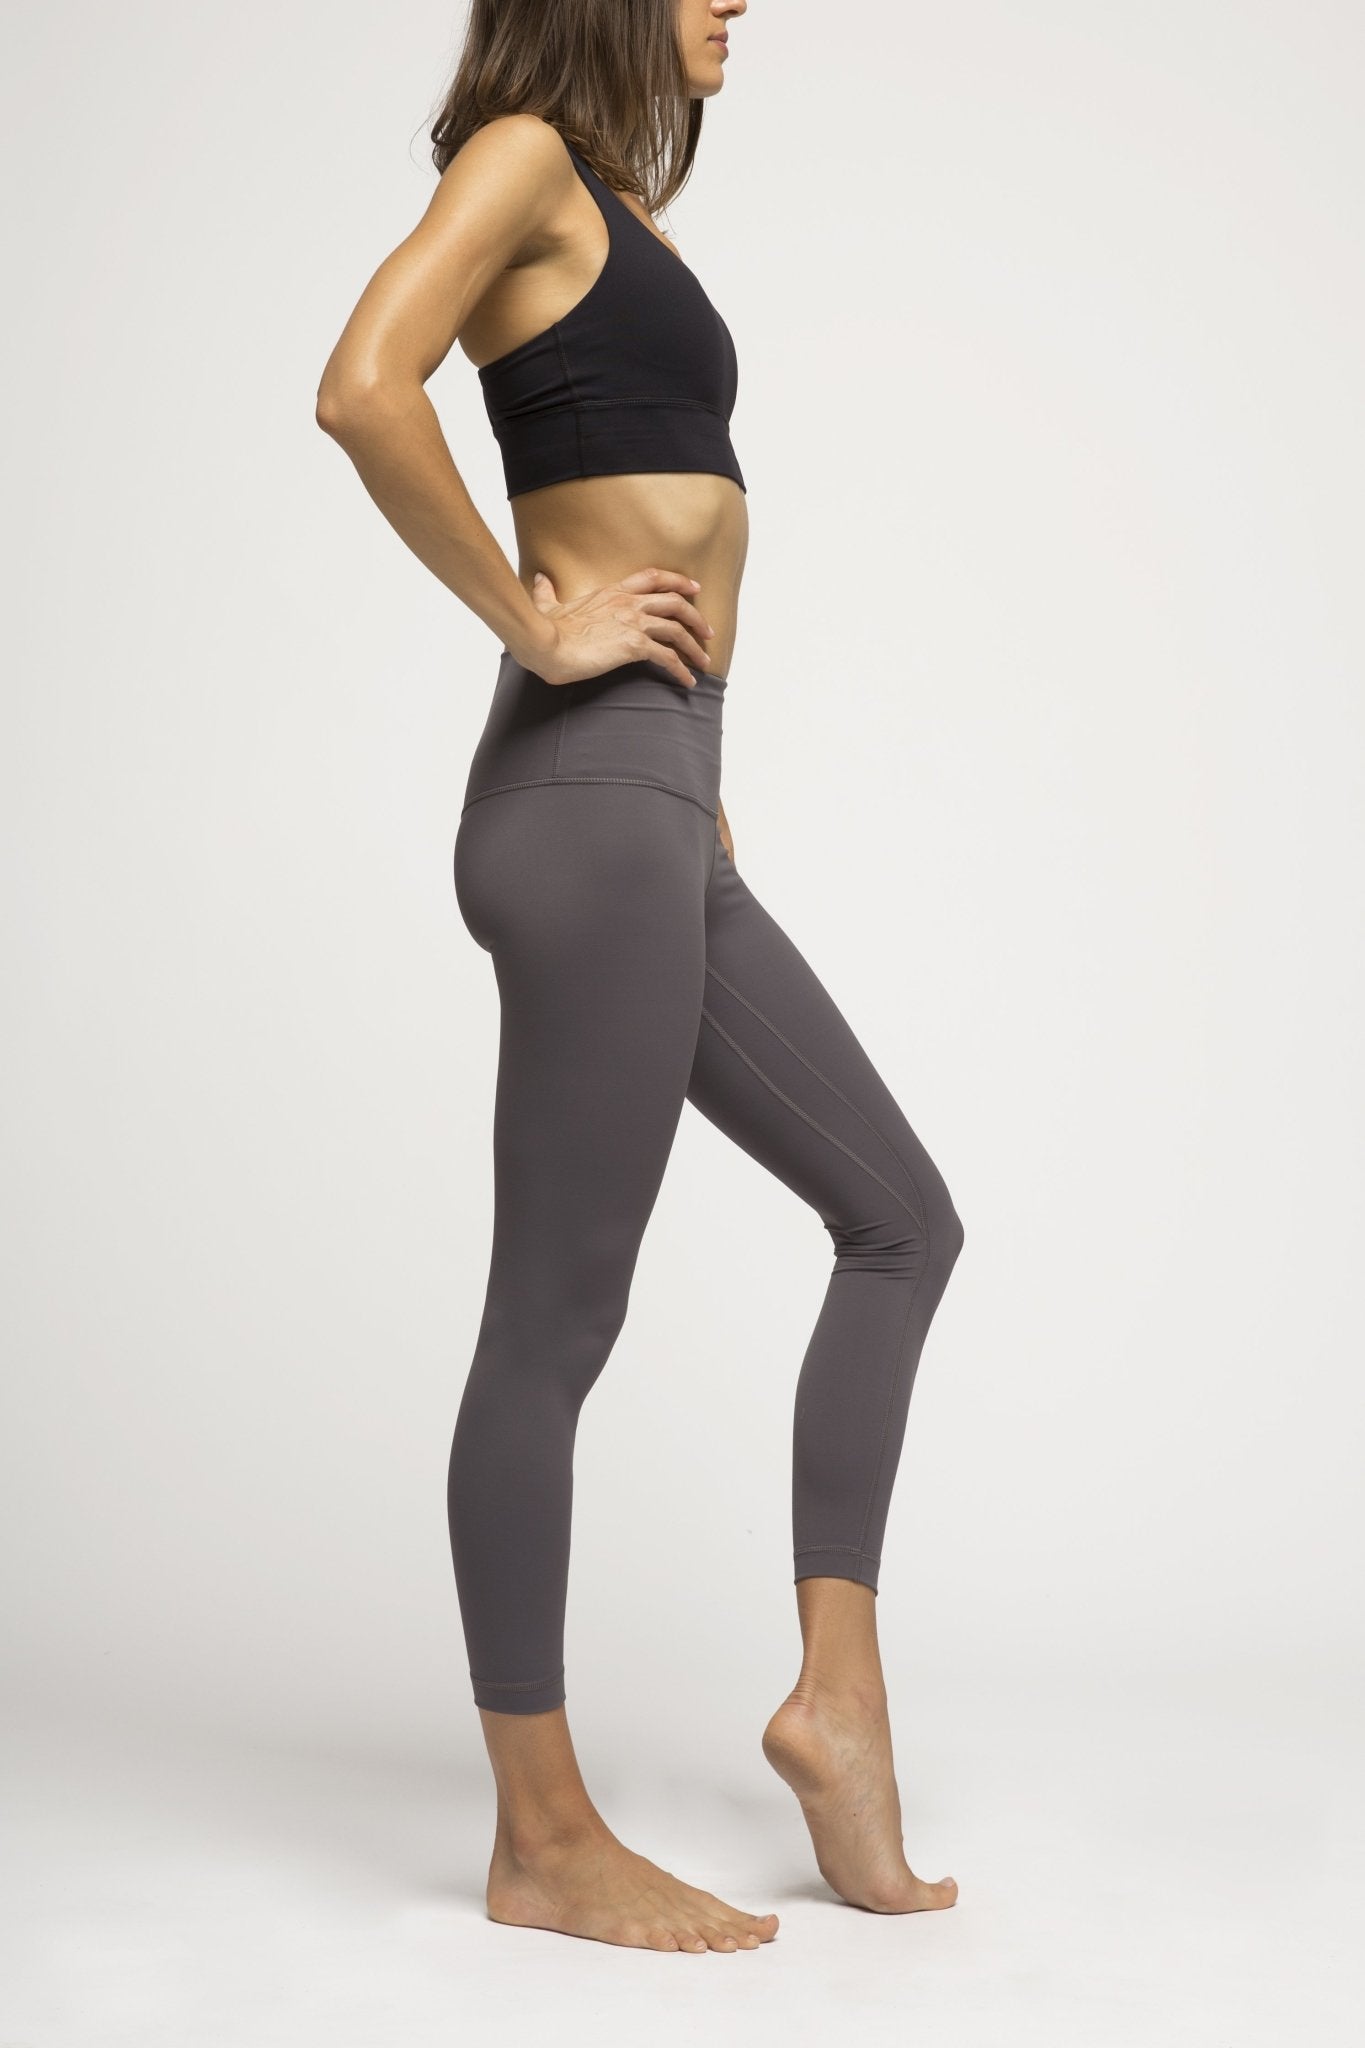 grey yoga pants outfit